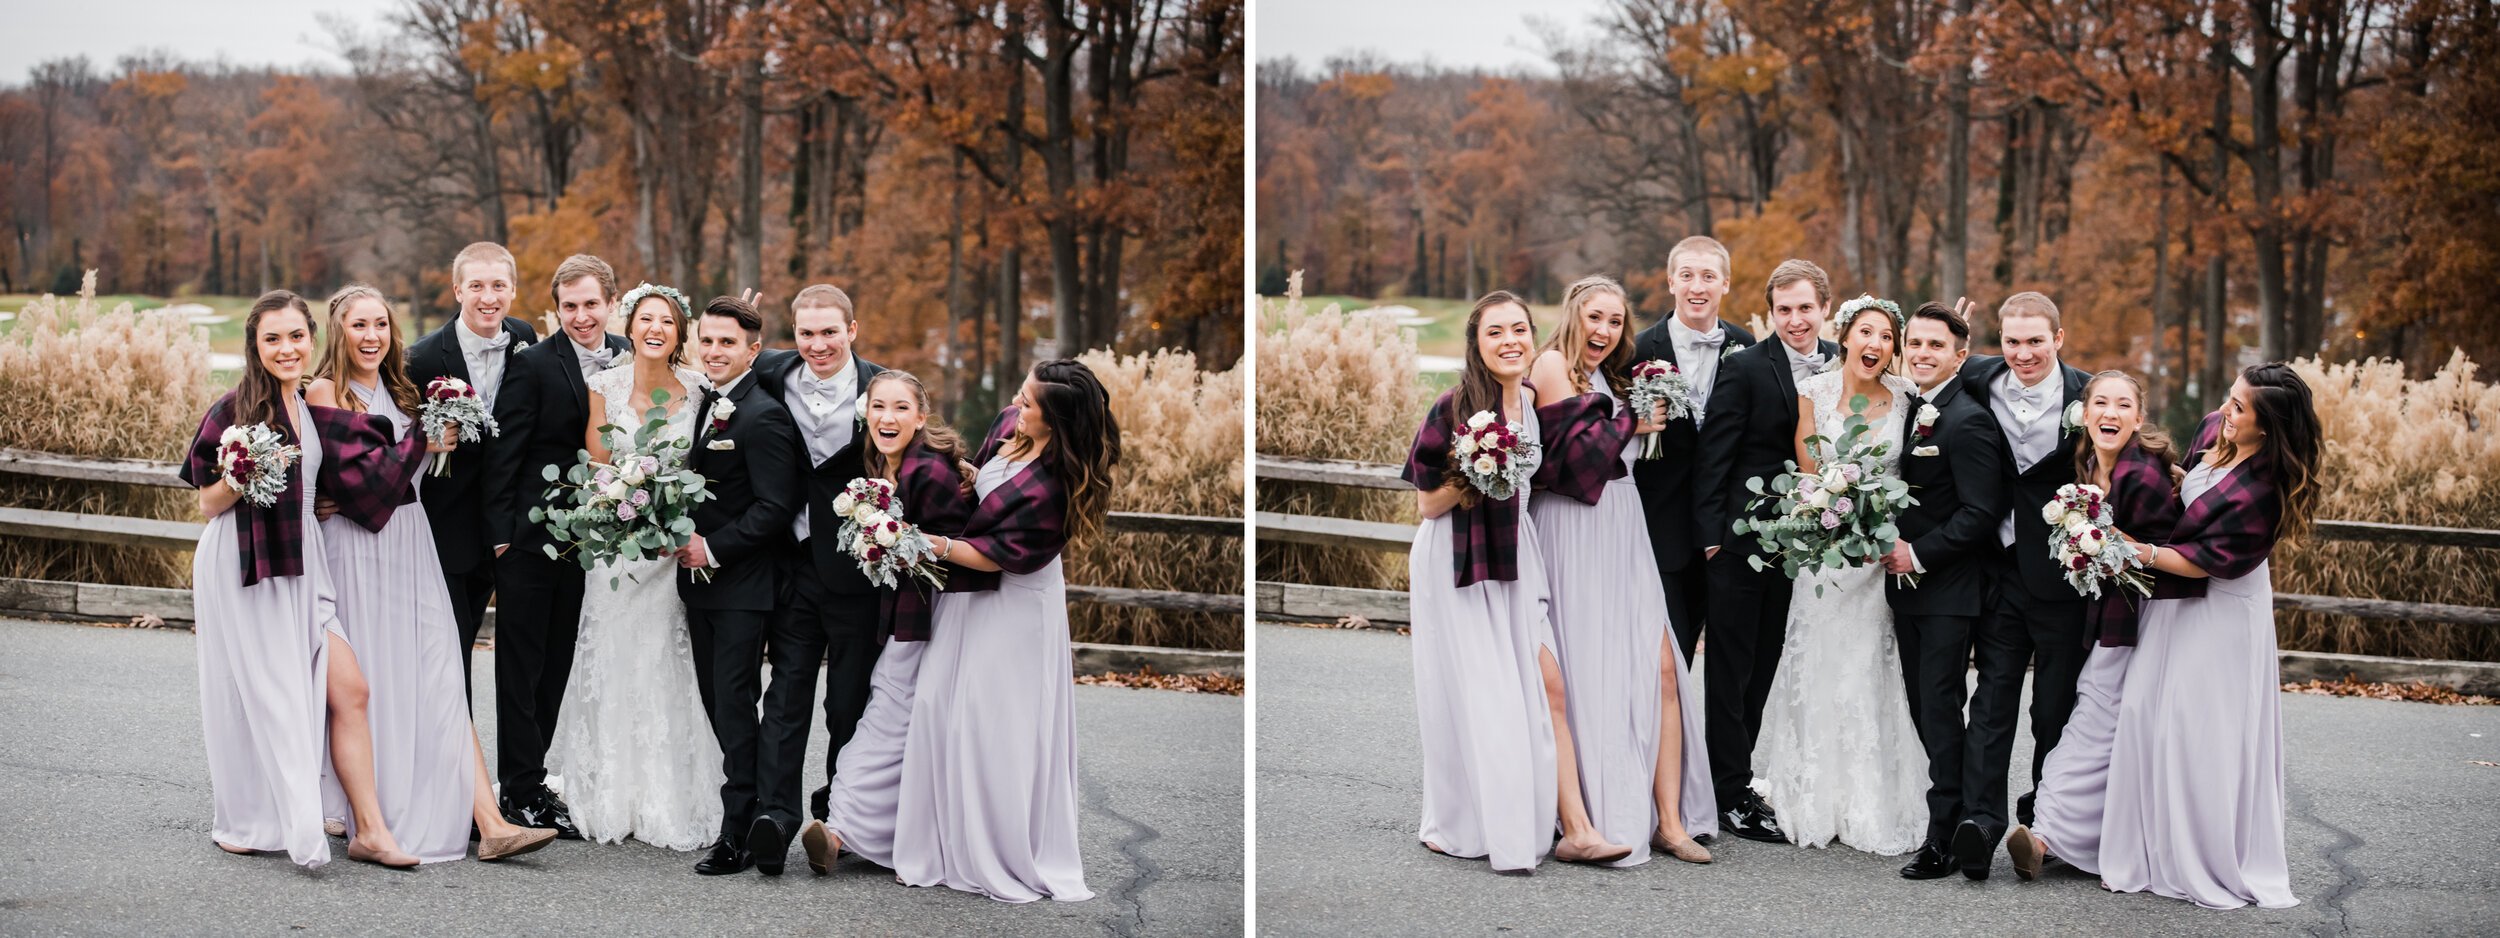 Bridal party photography in Maryland